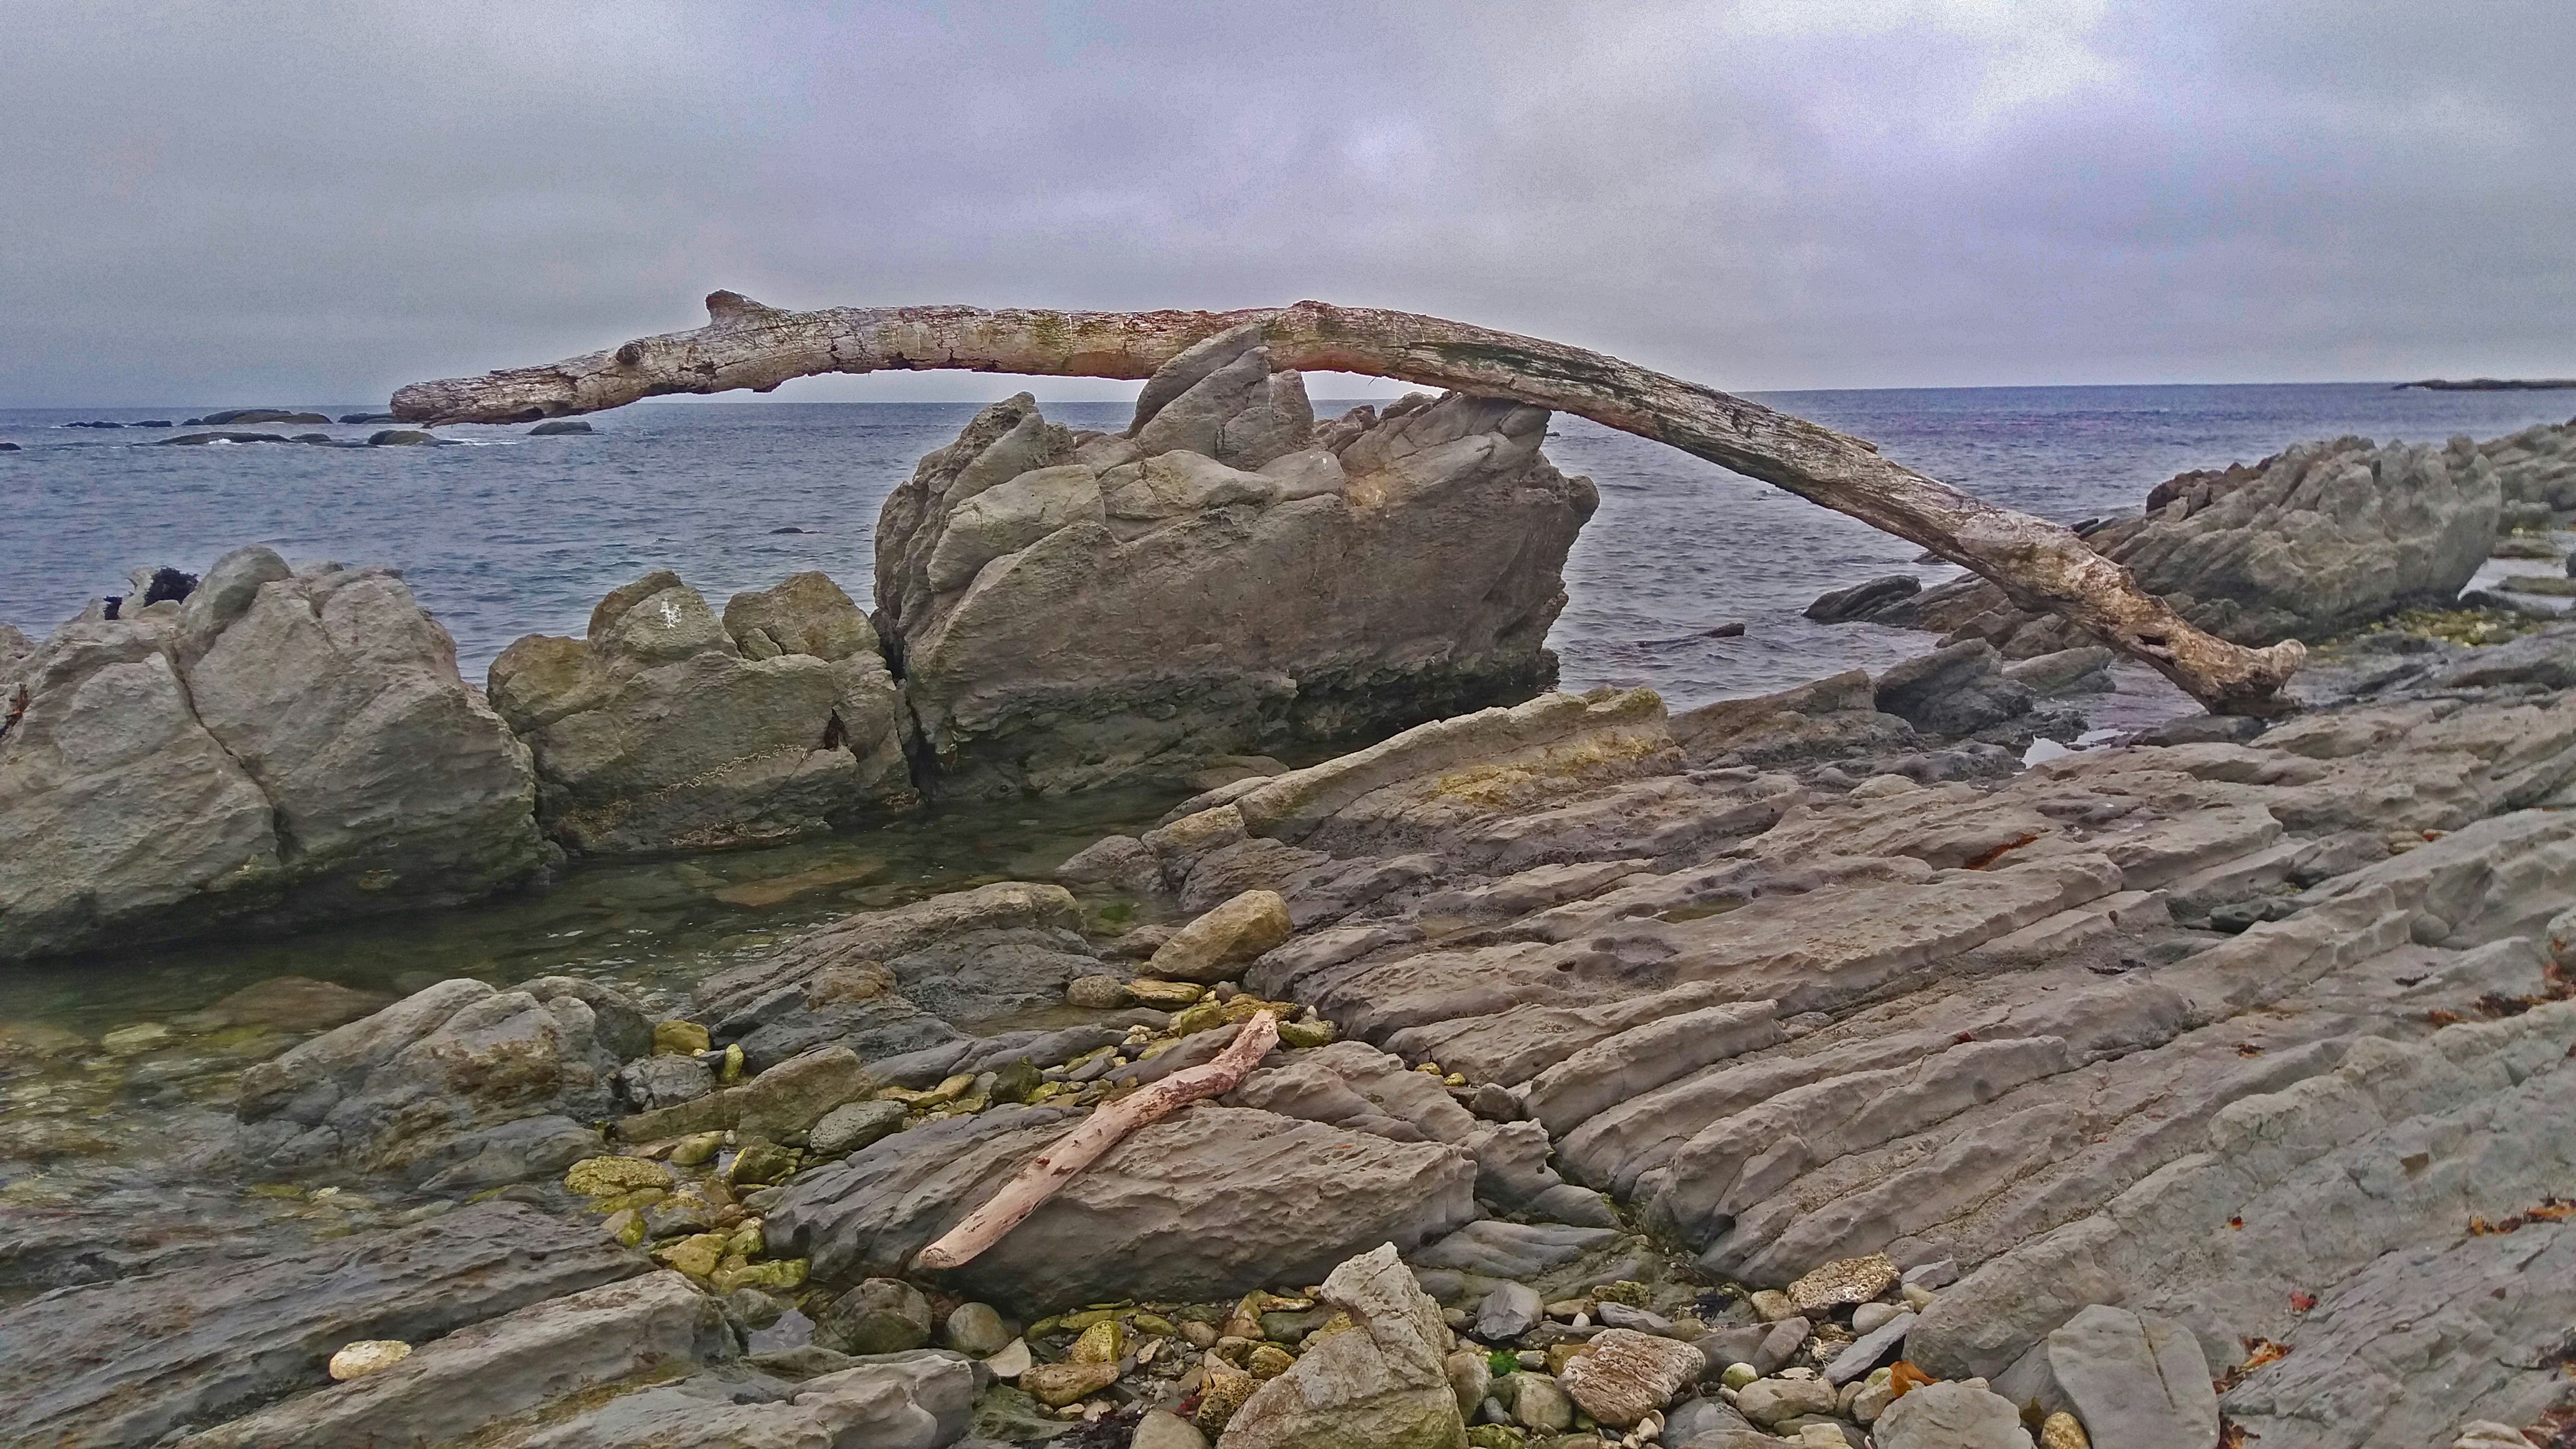 brown wooden log on gray rock formation near body of water during daytime